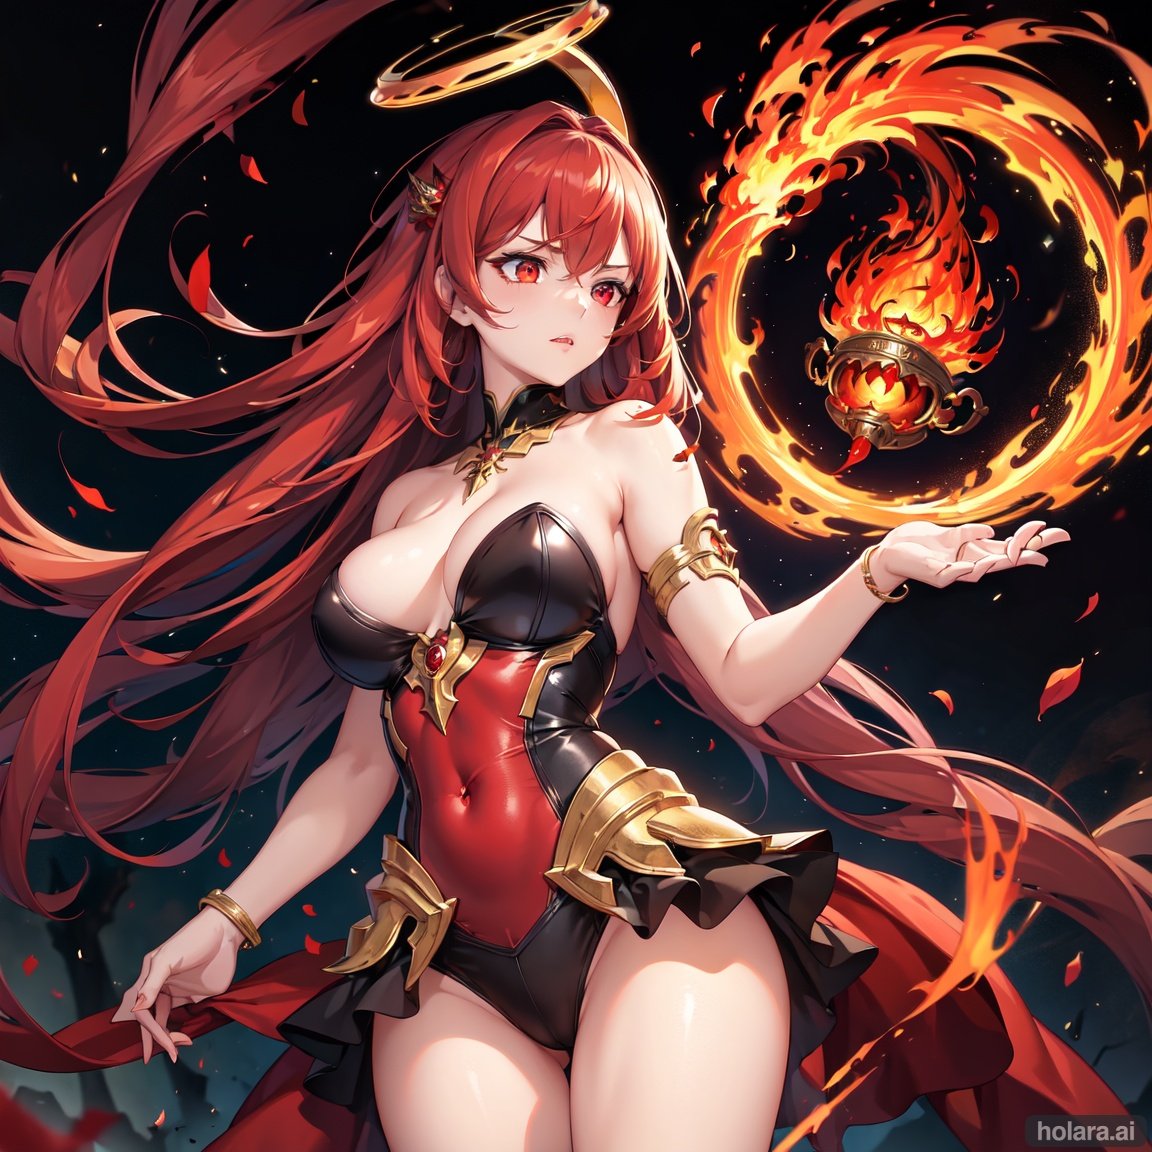 Image of masterpiece++, best quality++, ultra-detailed+, red fire, fire halo, girl, fire phoenix, vribant colors, demon queen, evil eye, armor